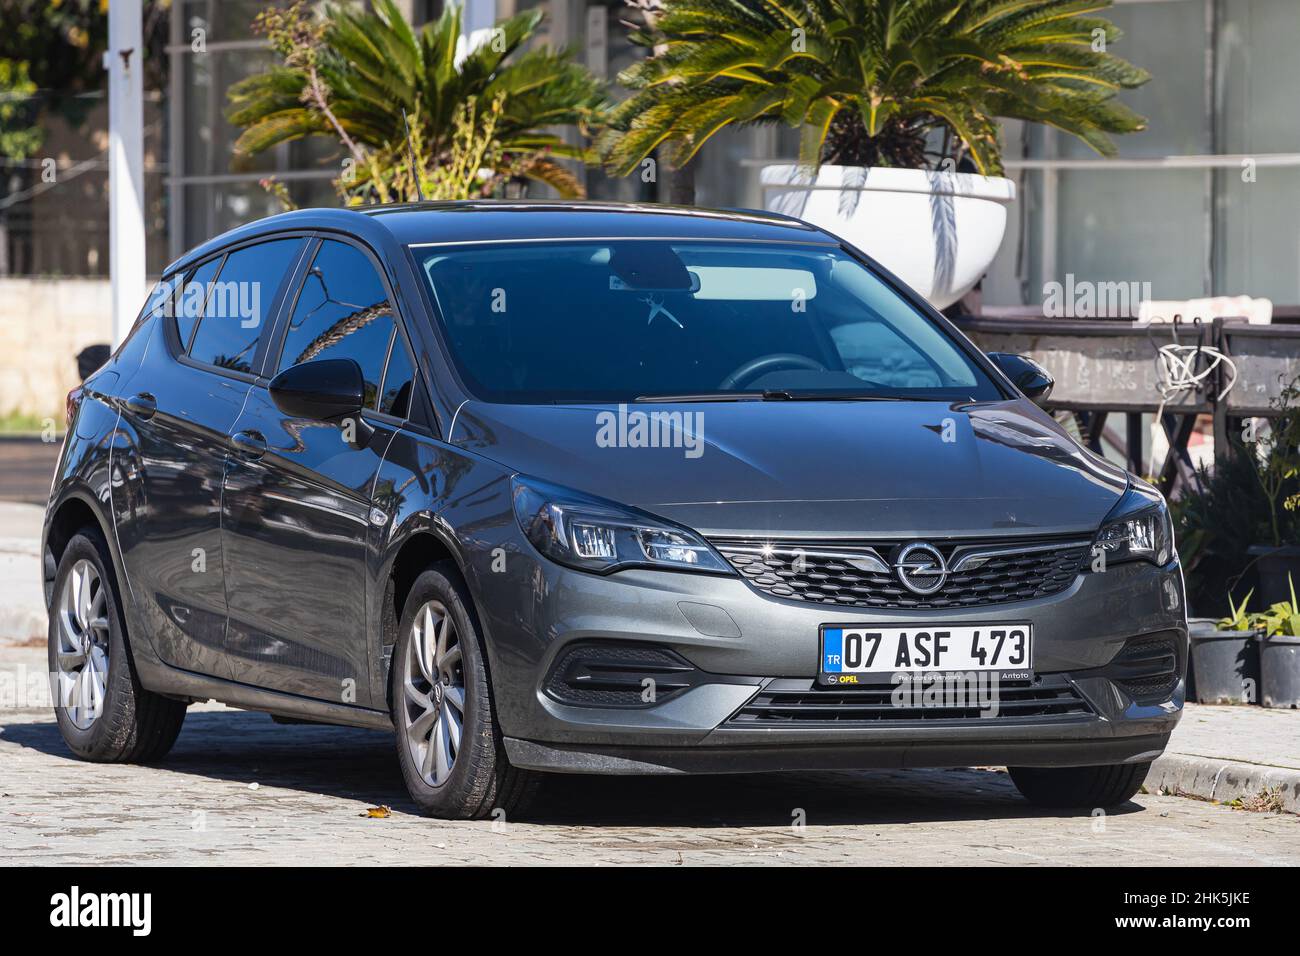 Side, Turkey -January 23, 2022: gray Opel Astra K is parked on the street  on a warm day against the backdrop of a buildung, trees, shops Stock Photo  - Alamy